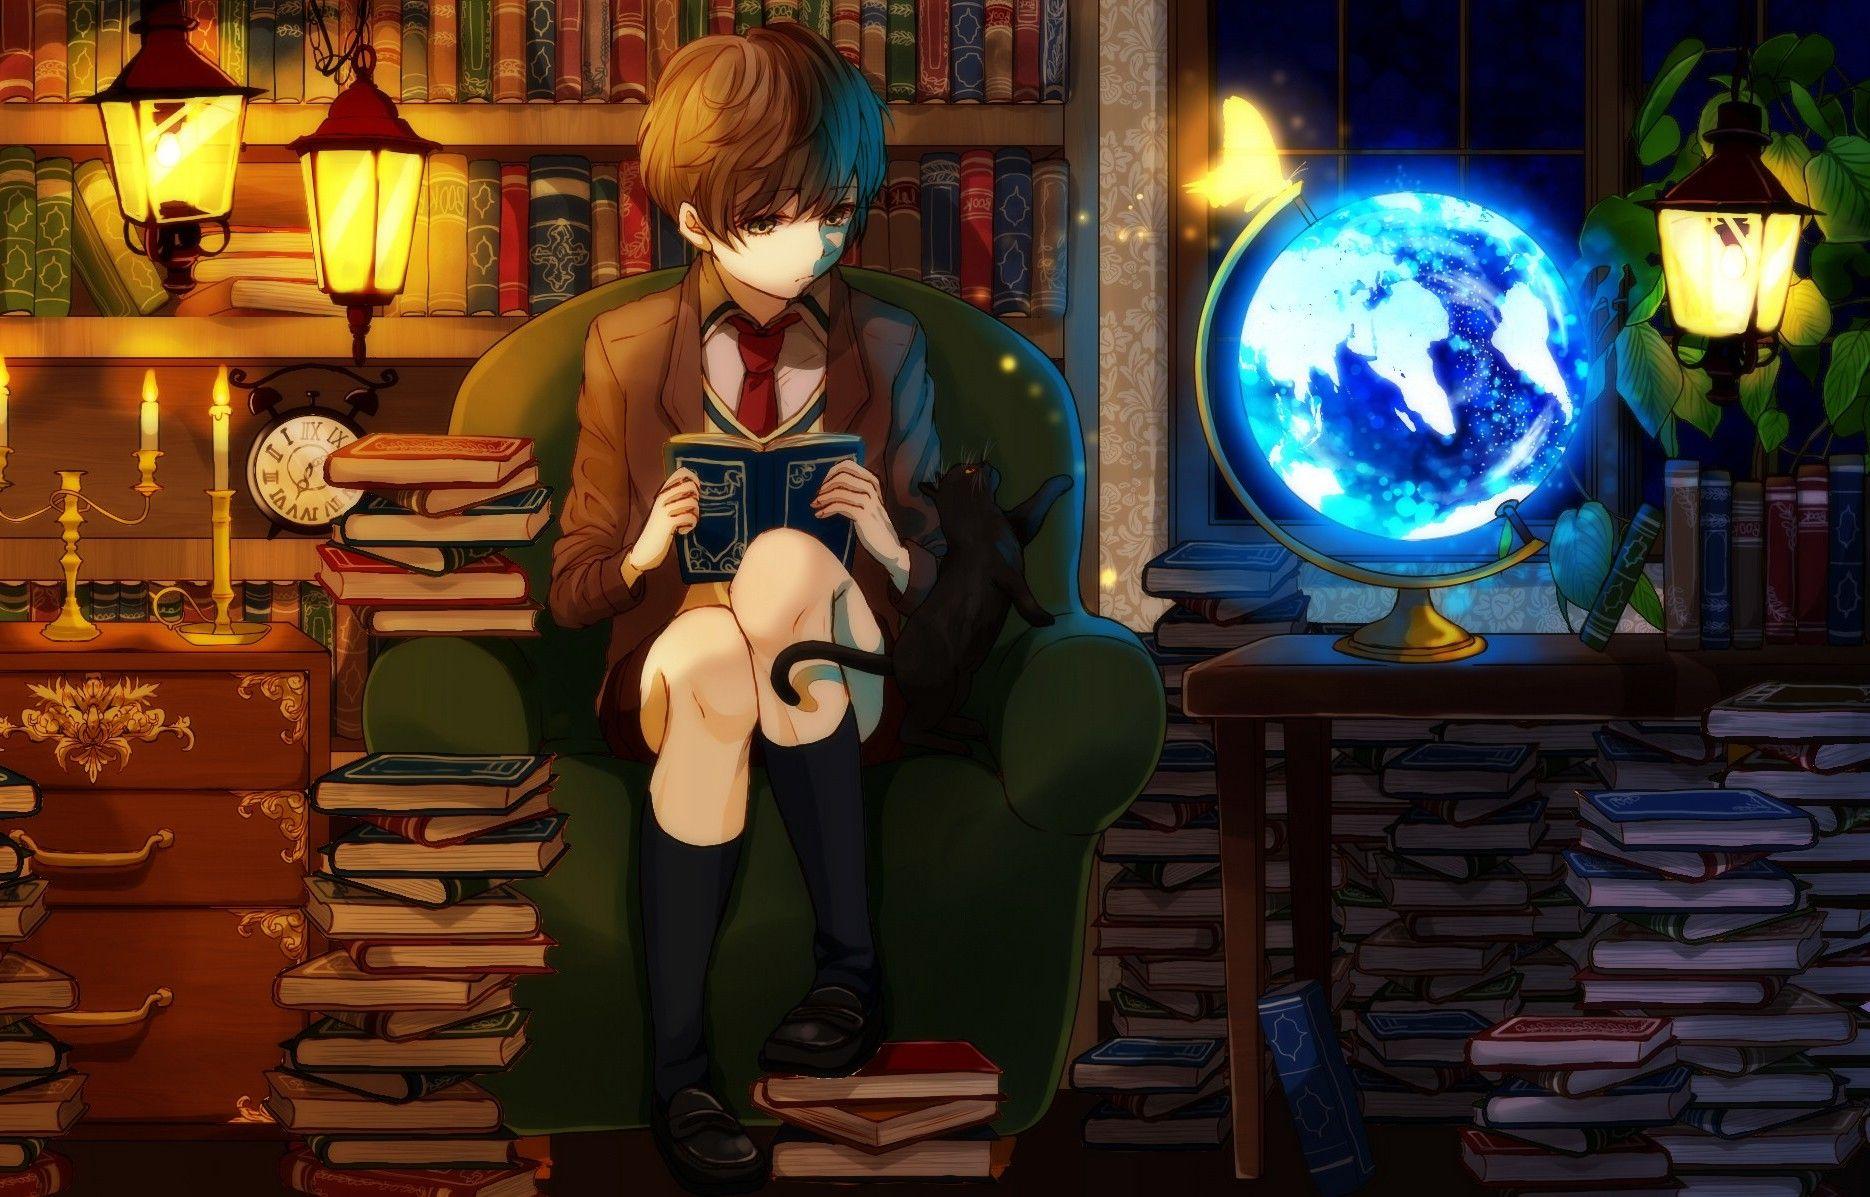 Magical Library  Other  Anime Background Wallpapers on Desktop Nexus  Image 1893920